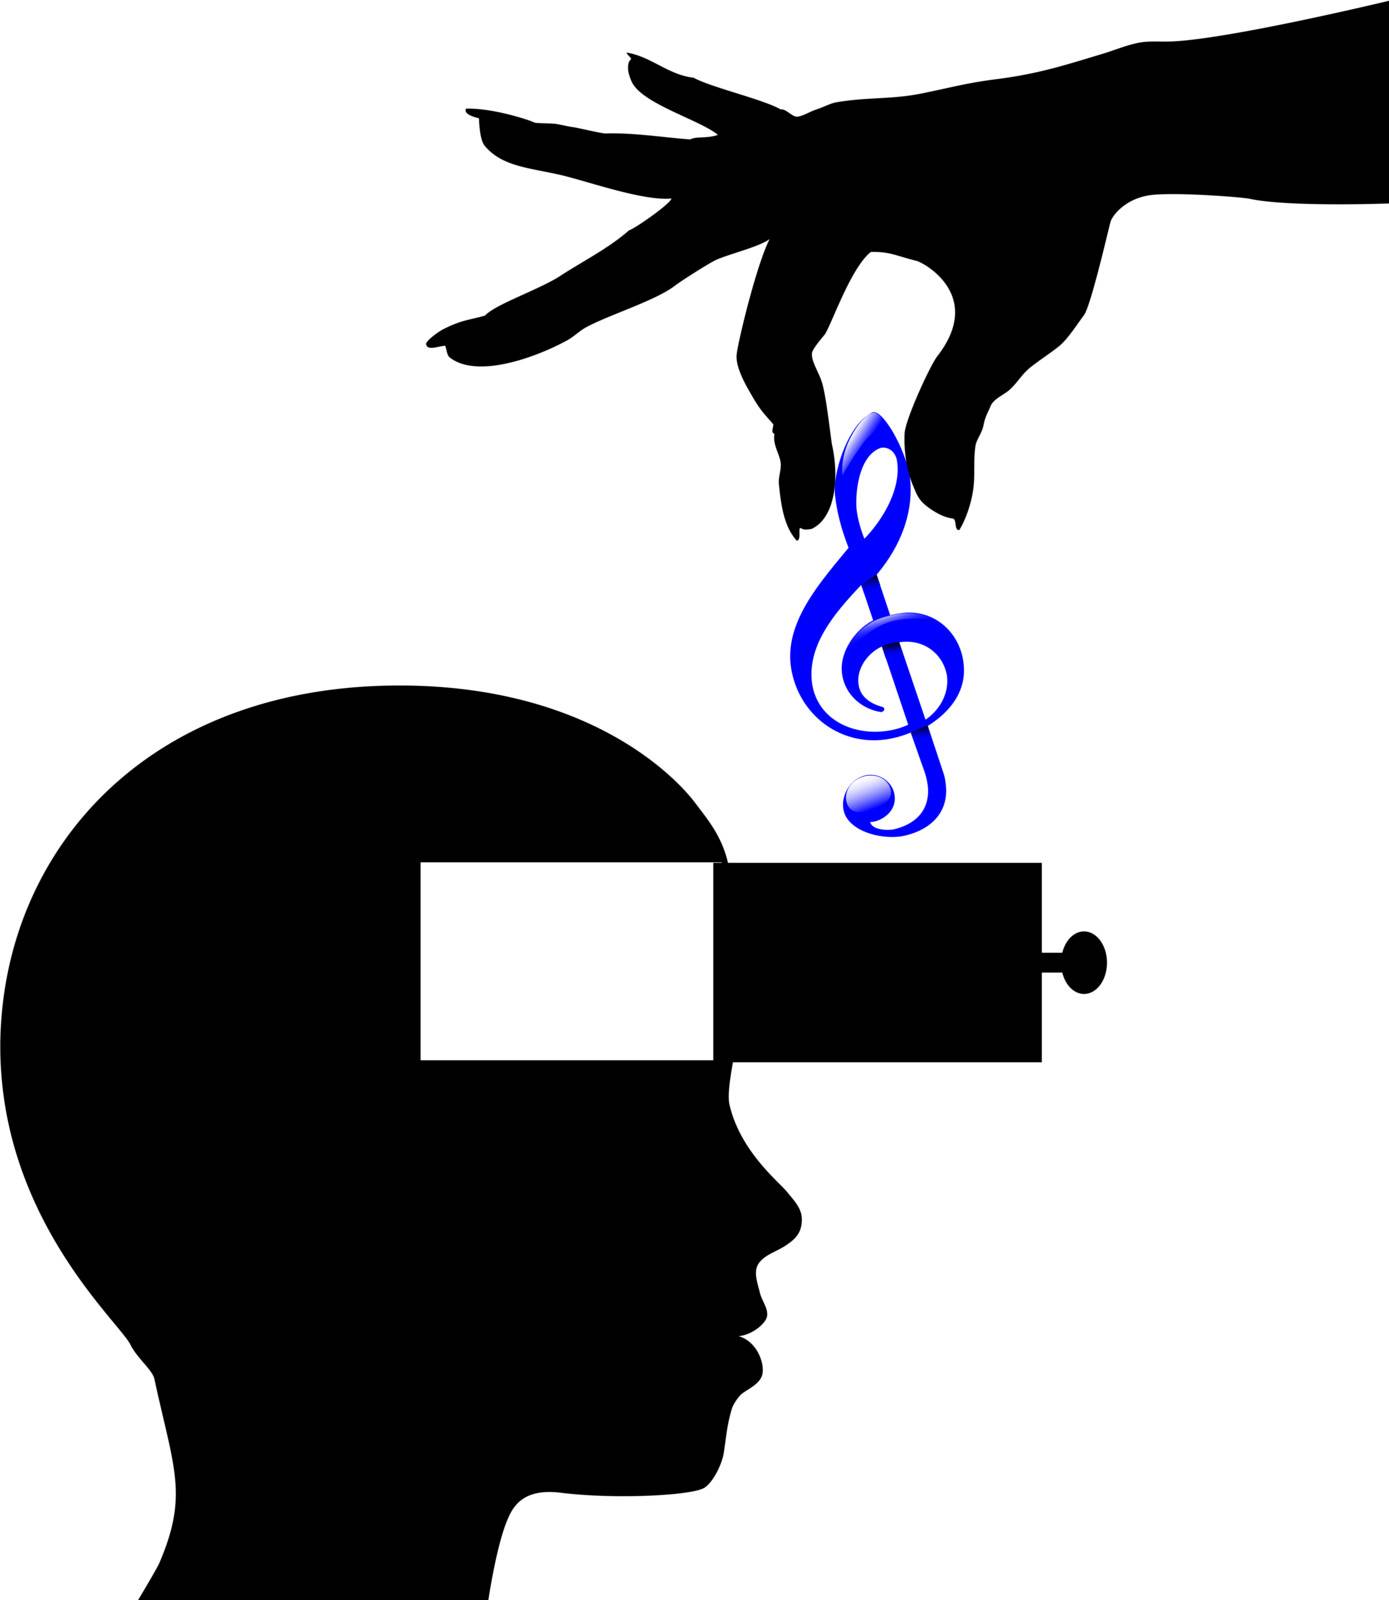 Music download lessons or appreciation into open mind of person